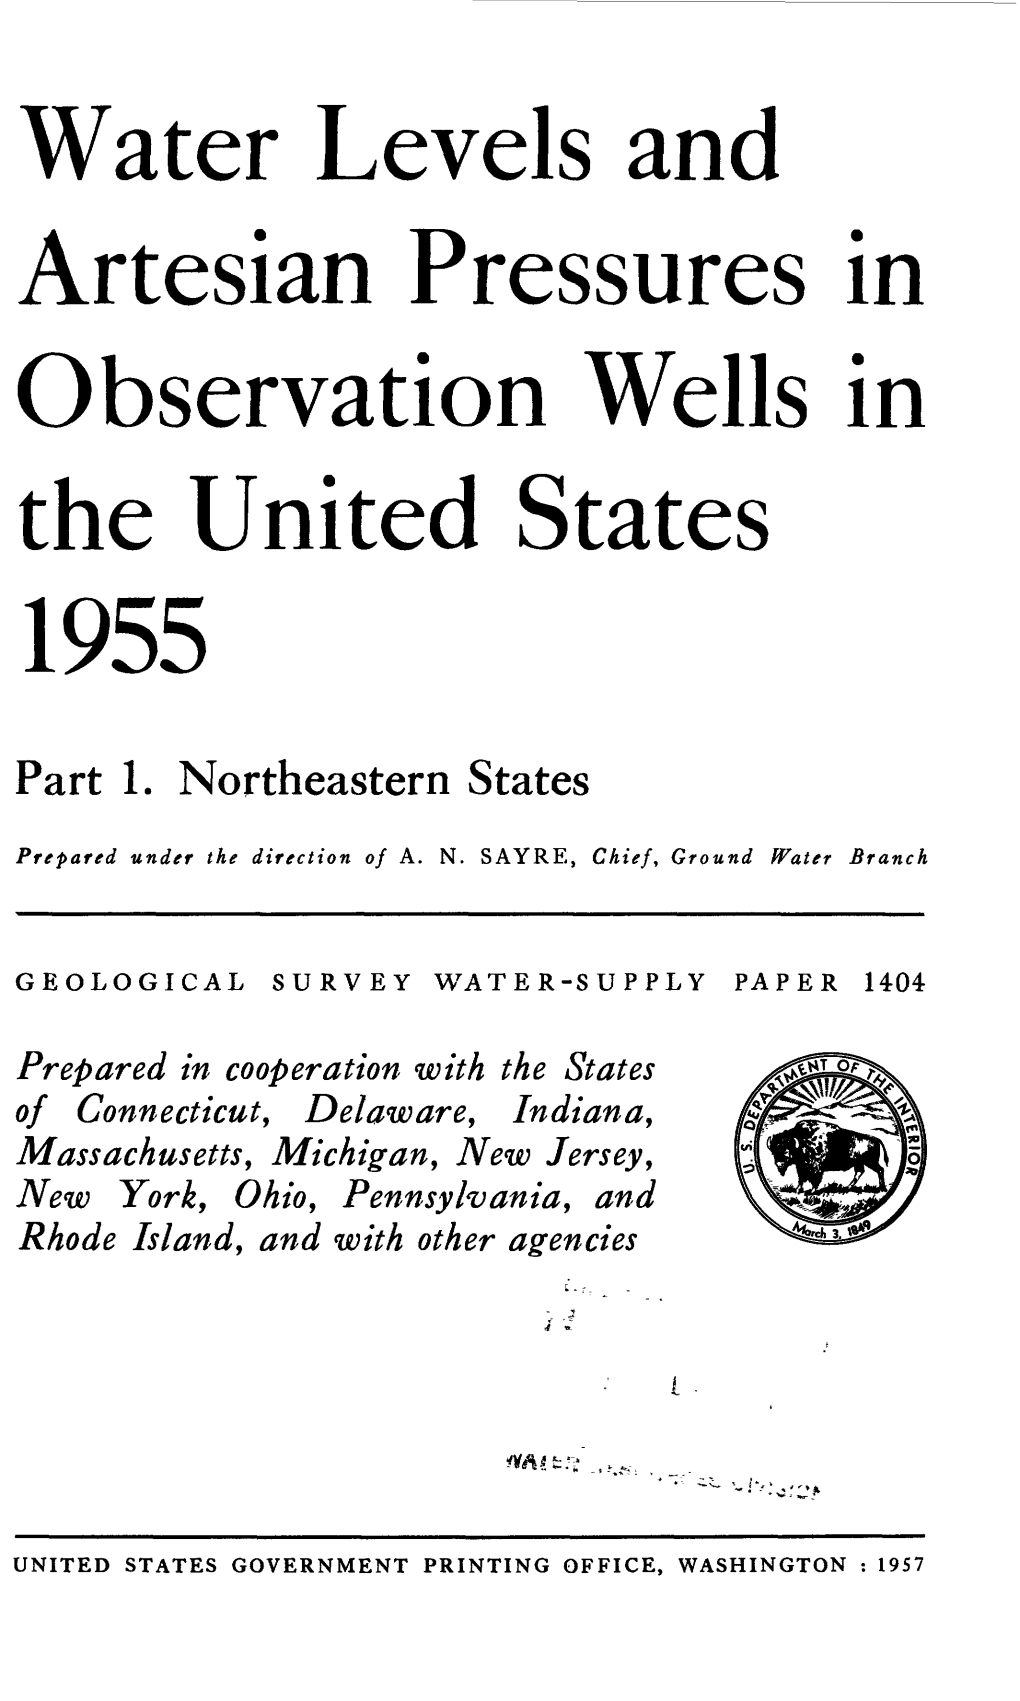 Water Levels and Artesian Pressures in Observation Wells in the United States 1955